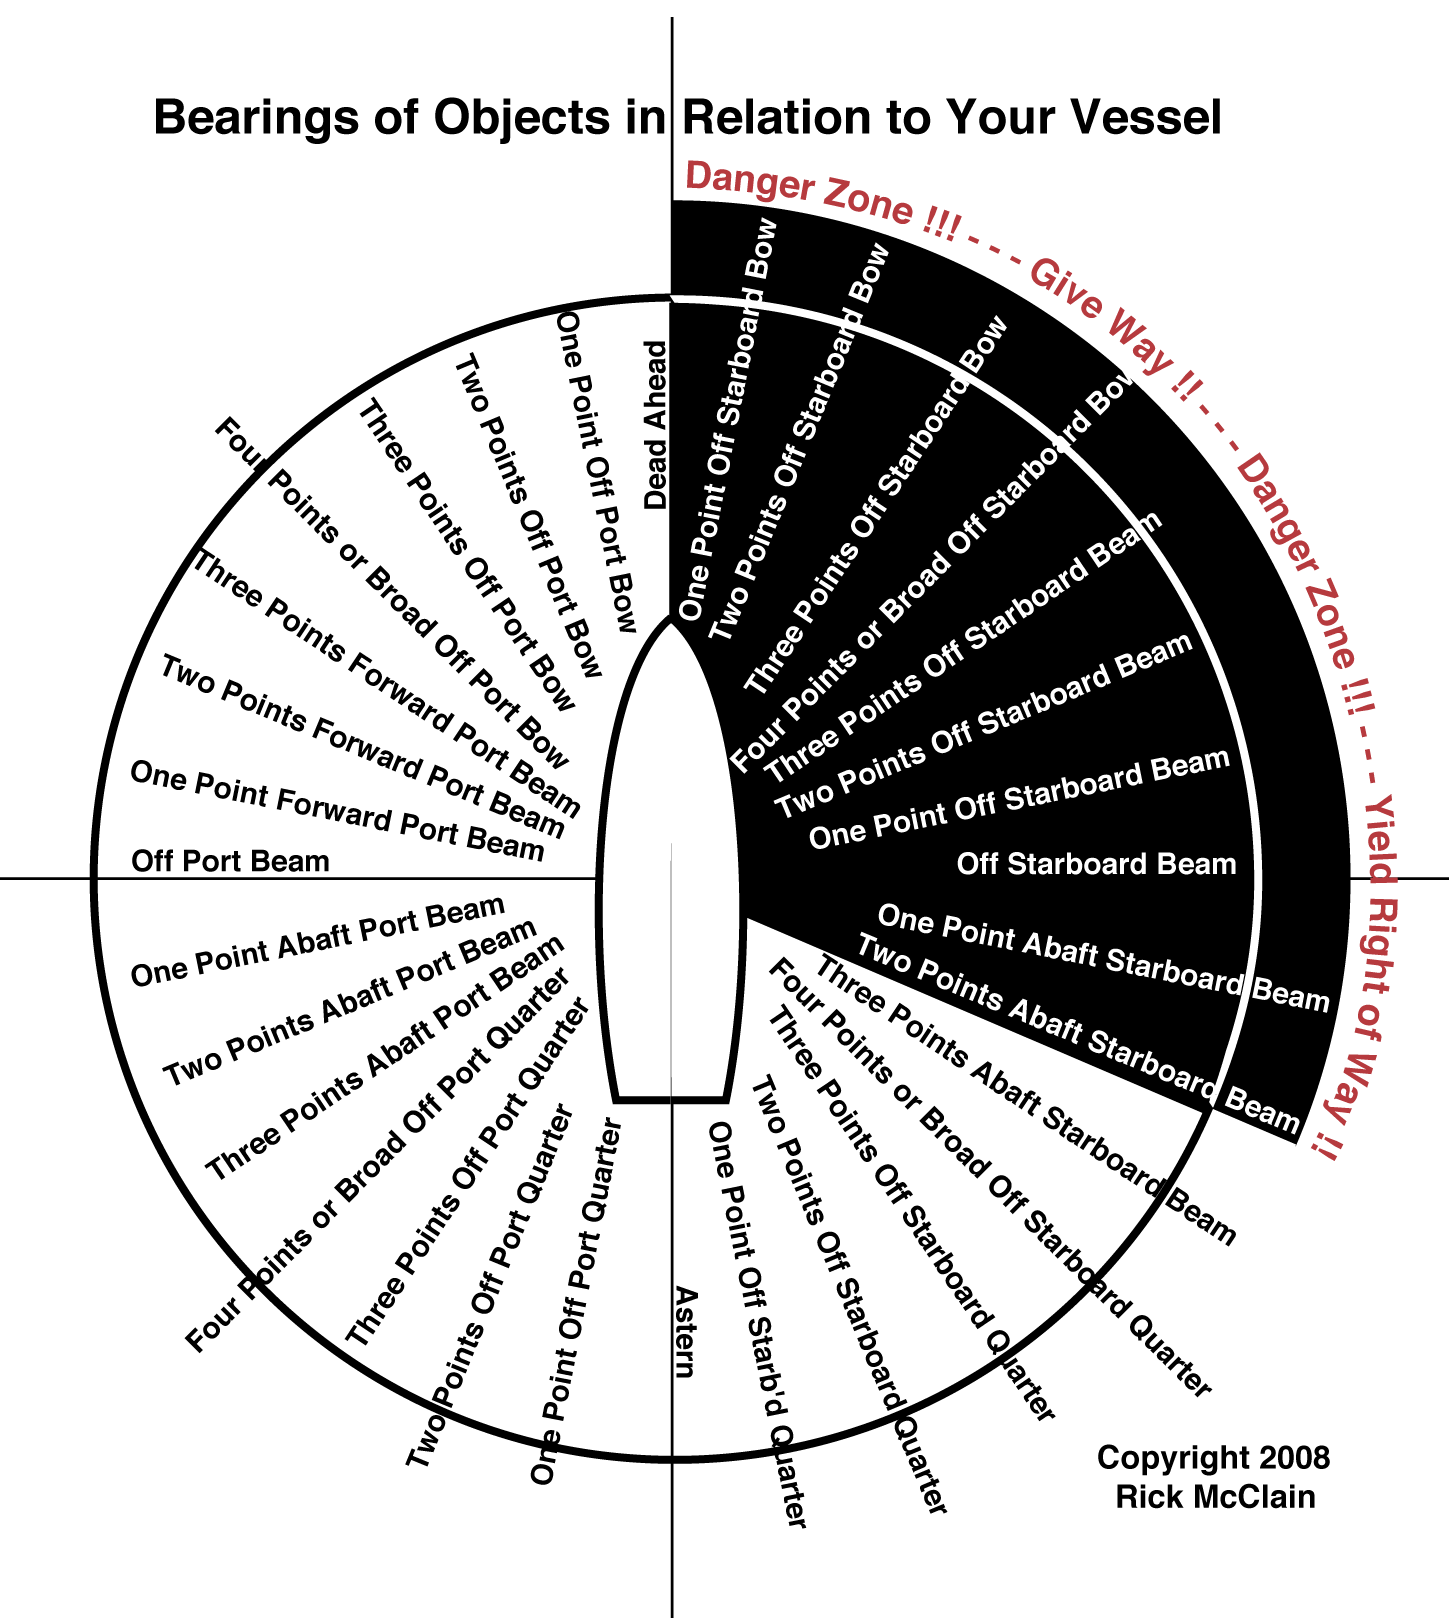 An illustration showing when YOUR vessel must GIVE Right of Way when approaching another vessel